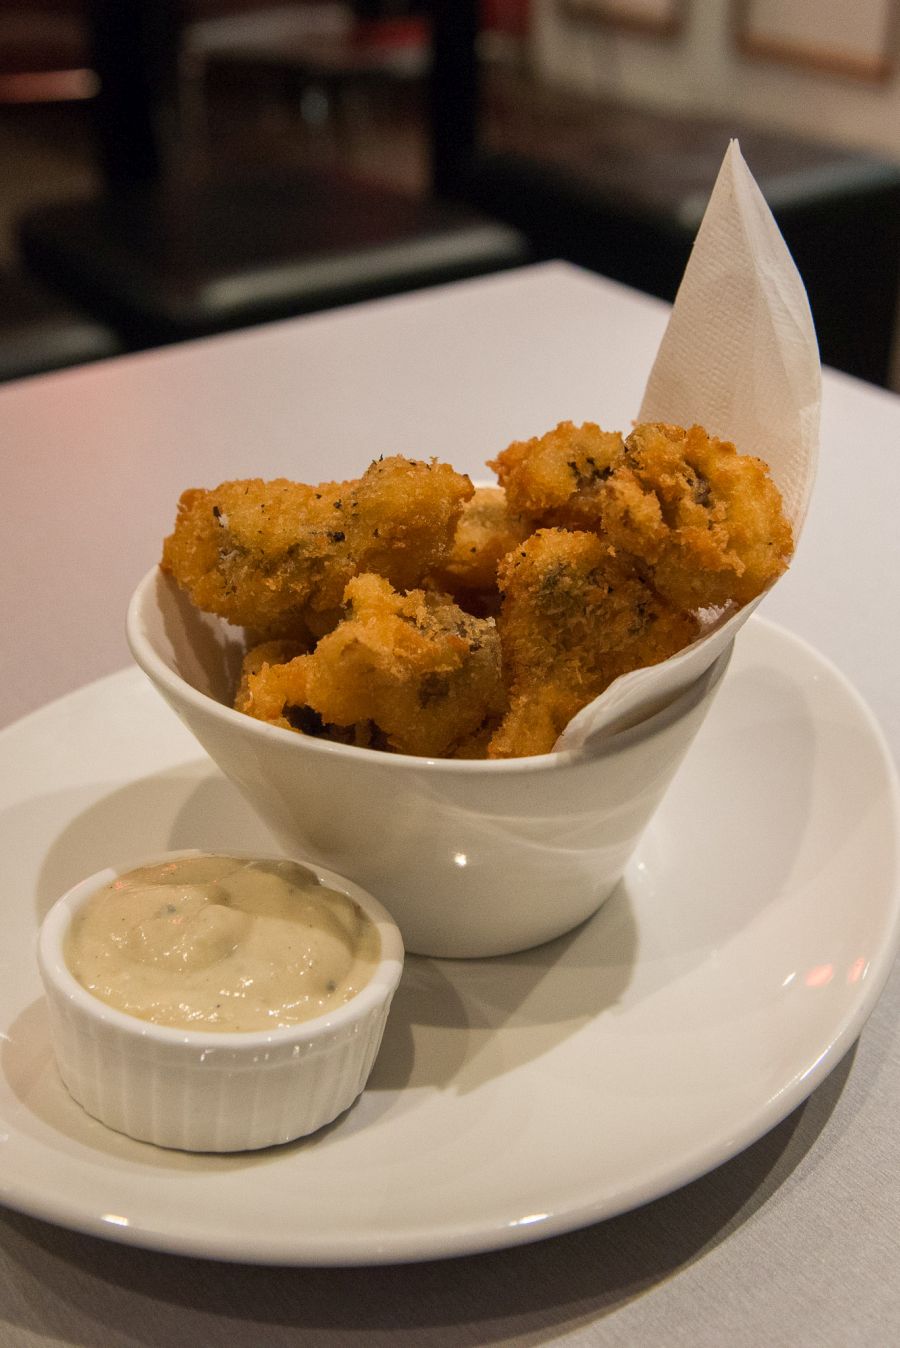 Crumbed mushrooms with blue cheese sauce (AU$8)